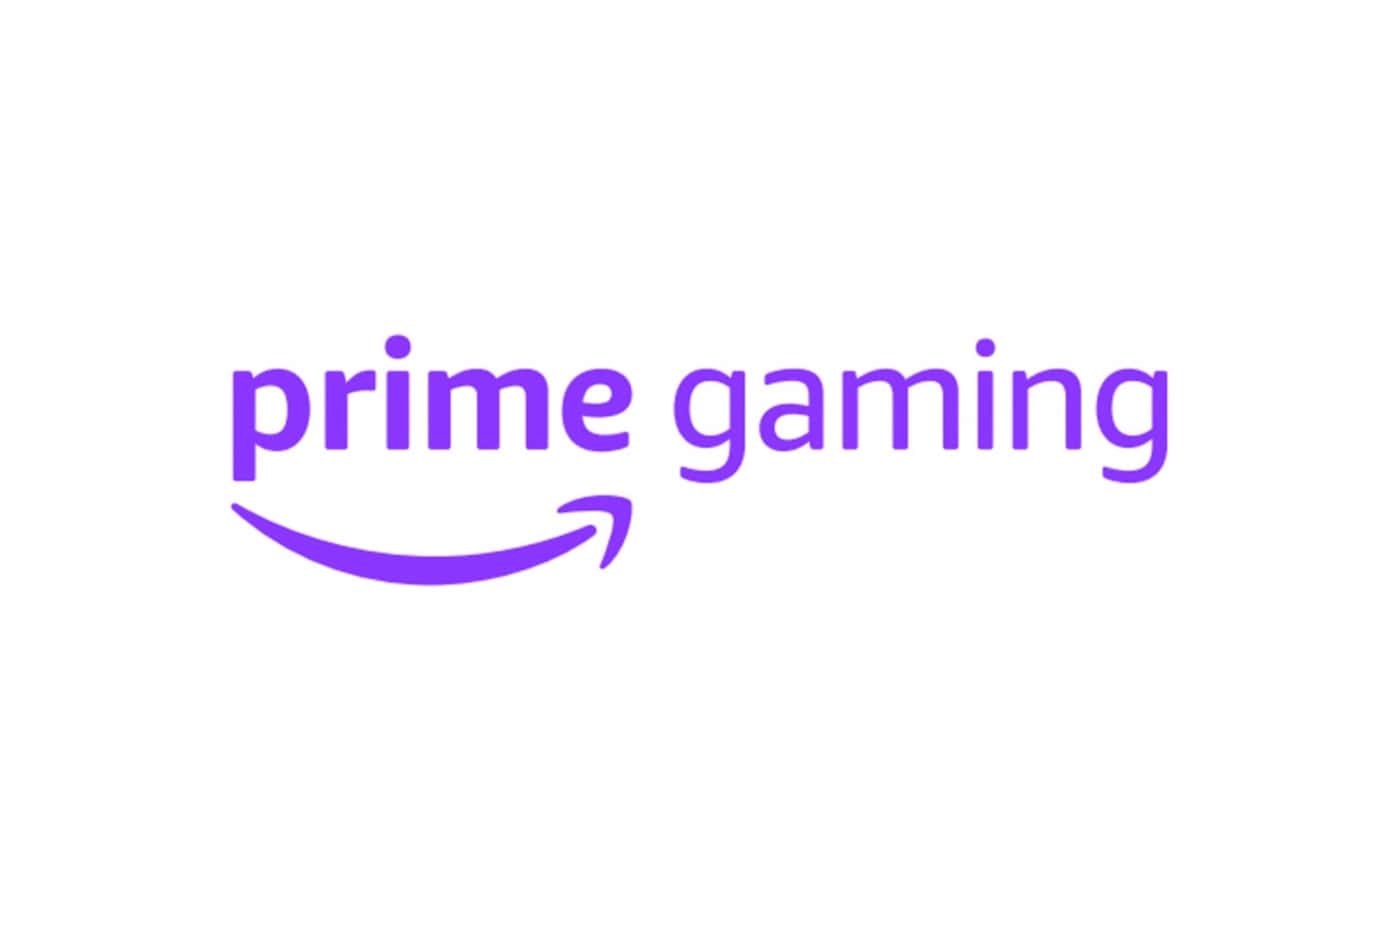 Amazon’s Prime Gaming shows off new rewards for April